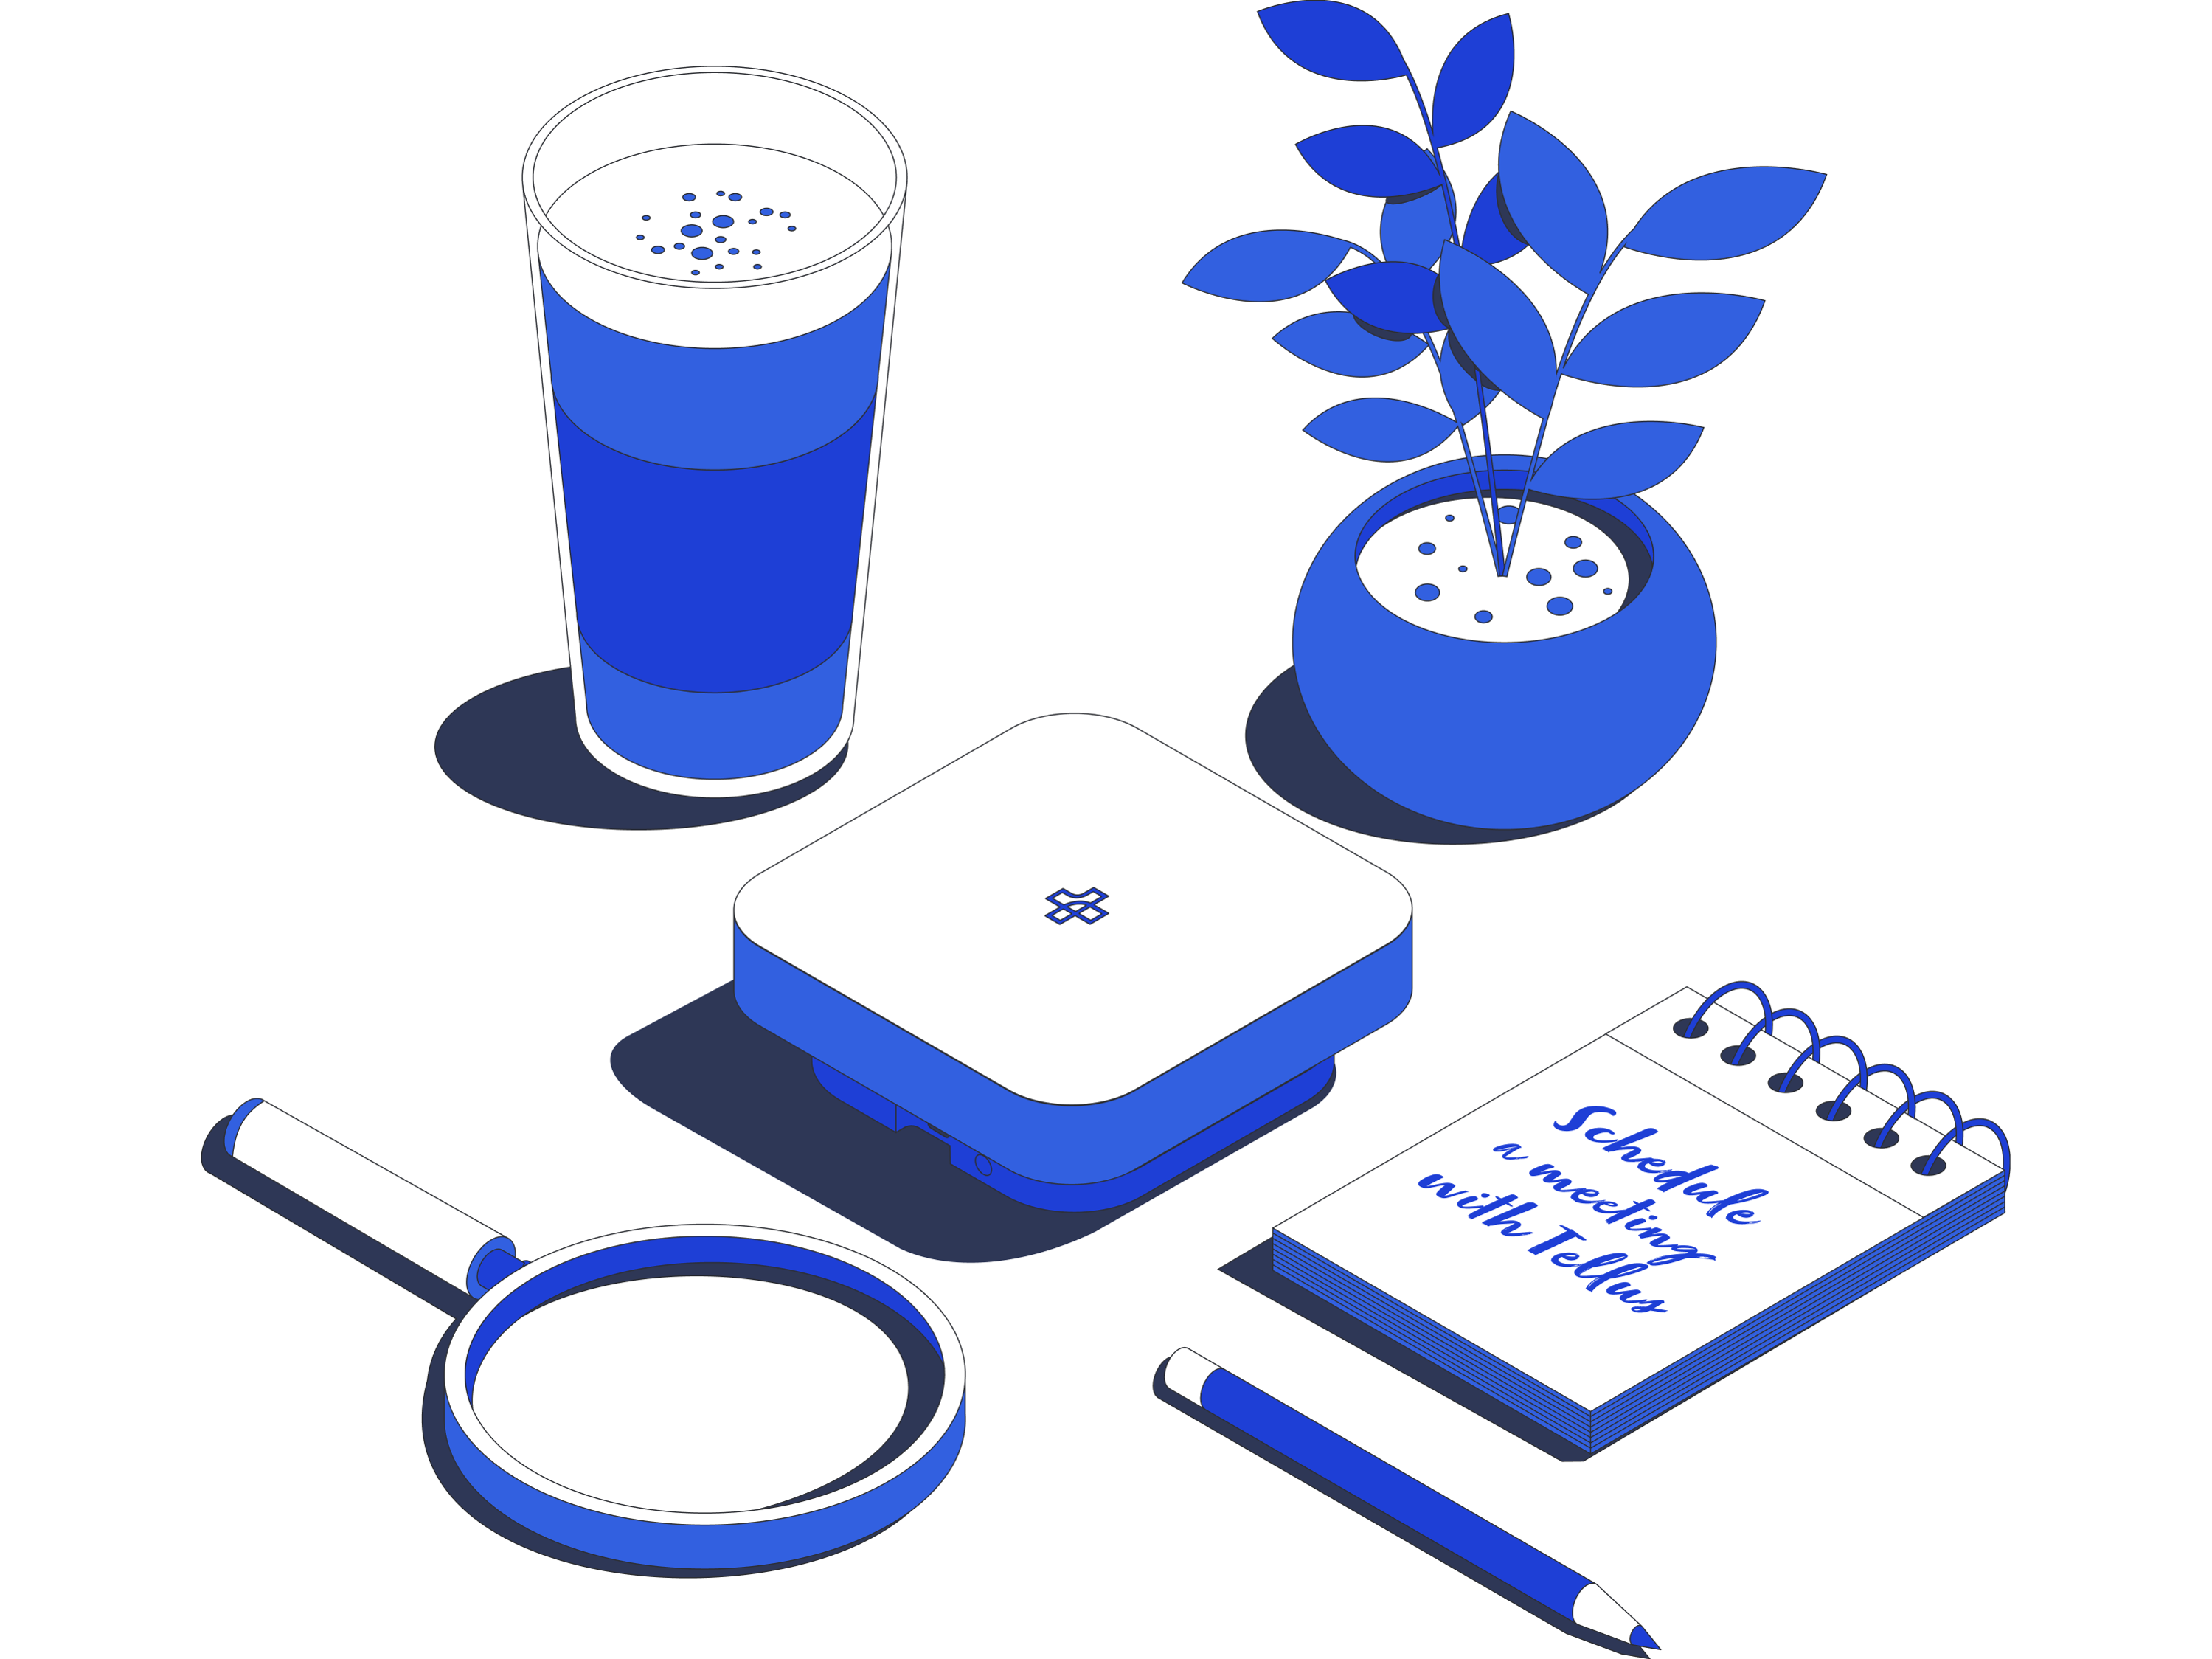 Illustrated graphic of a scene with the Tellus device surrounded by simple stationaries